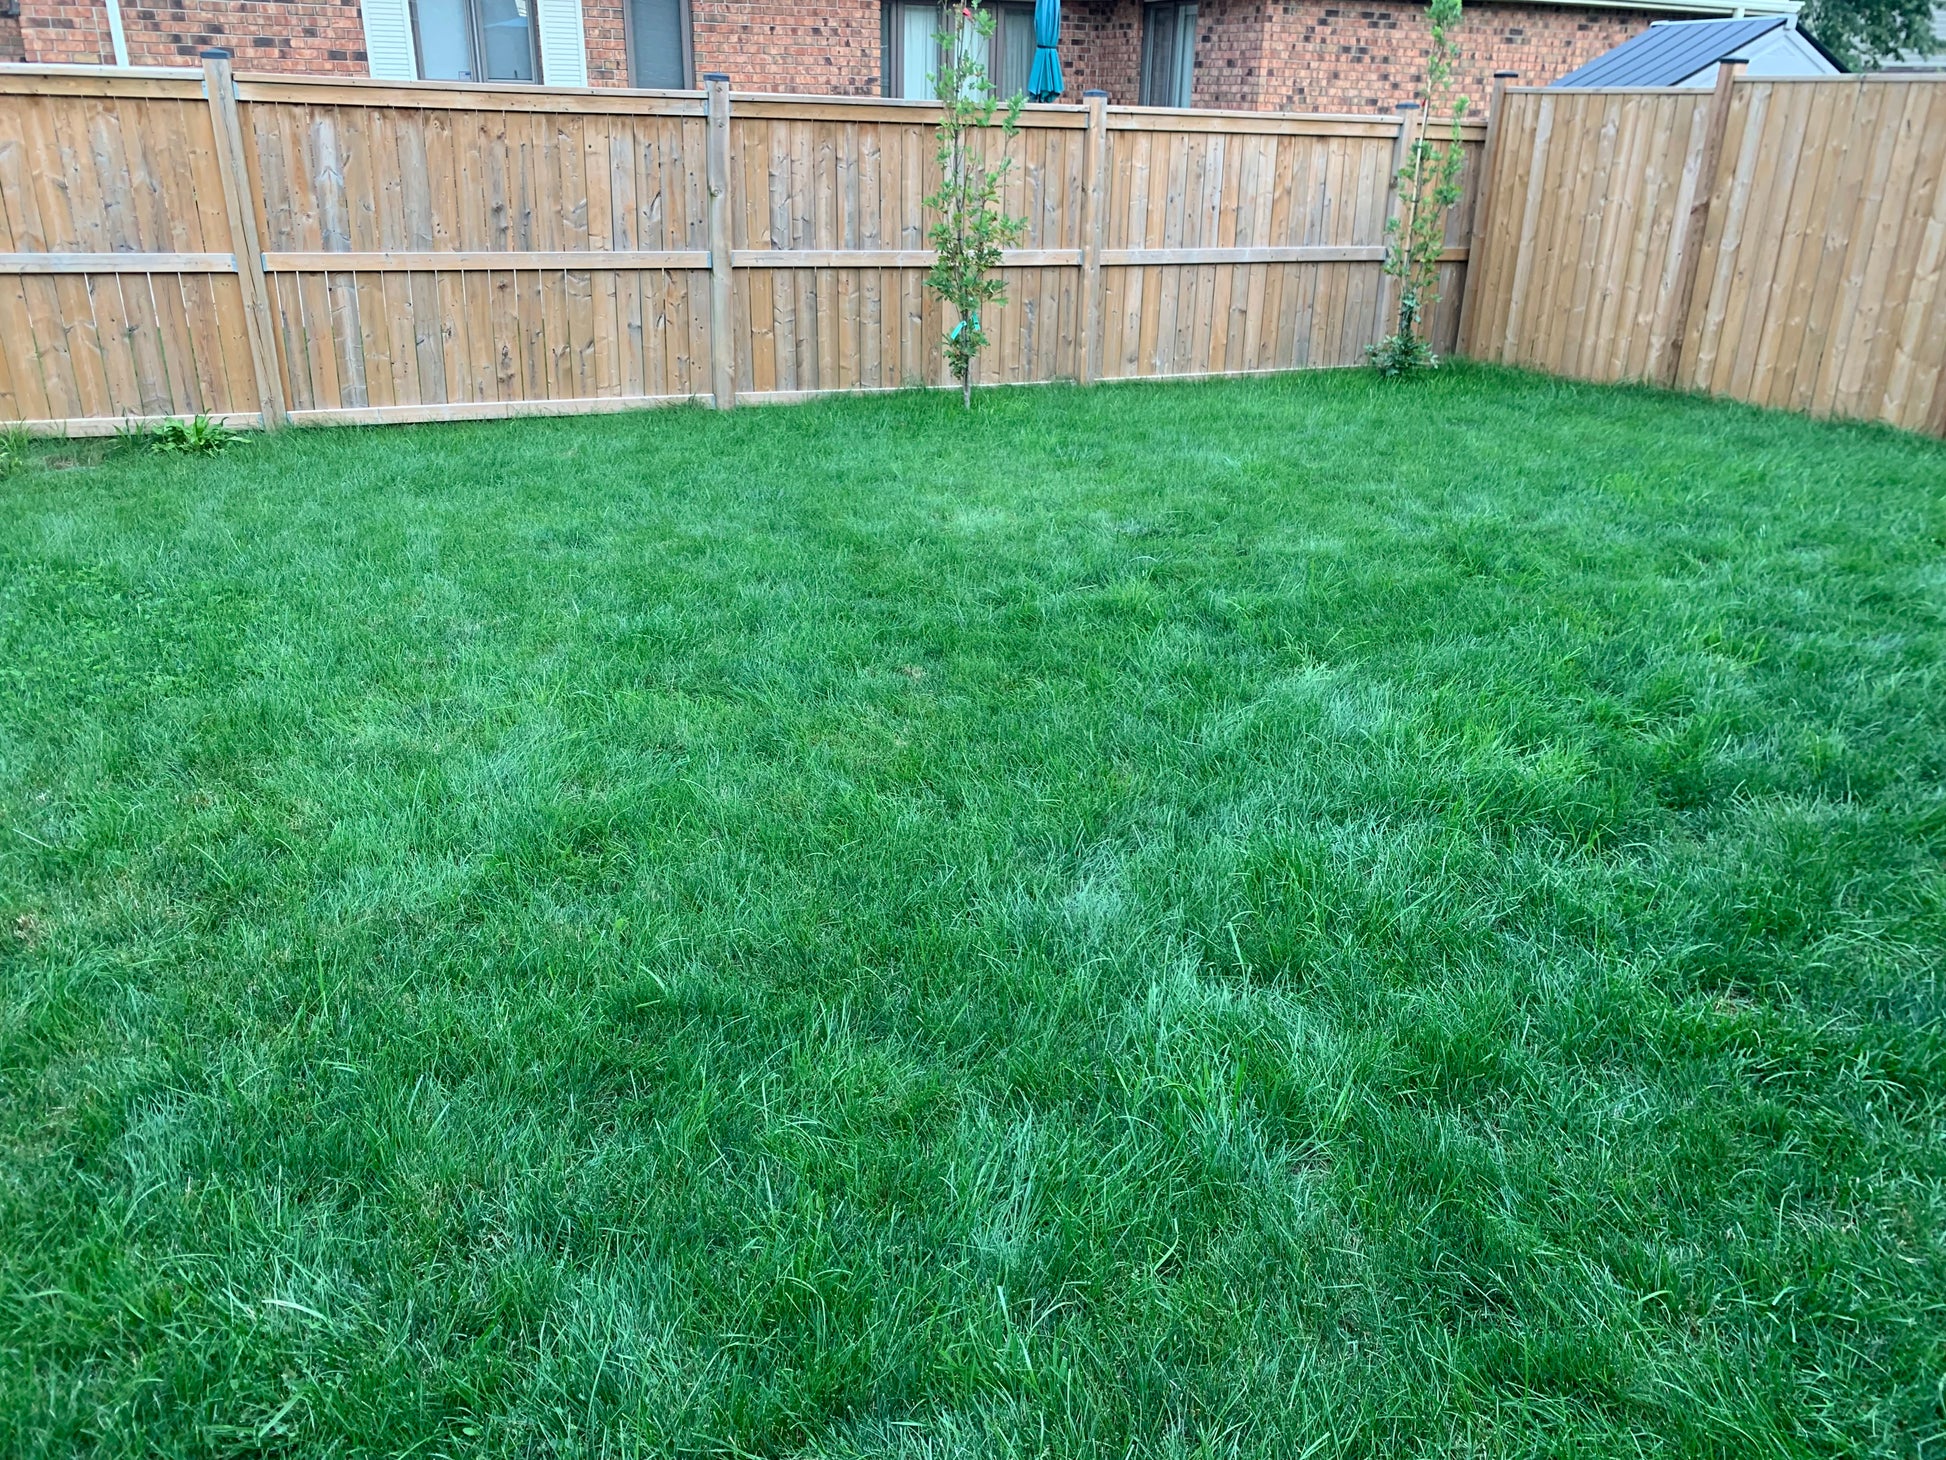 Back Lawn After Using the Ecolawn Aerator